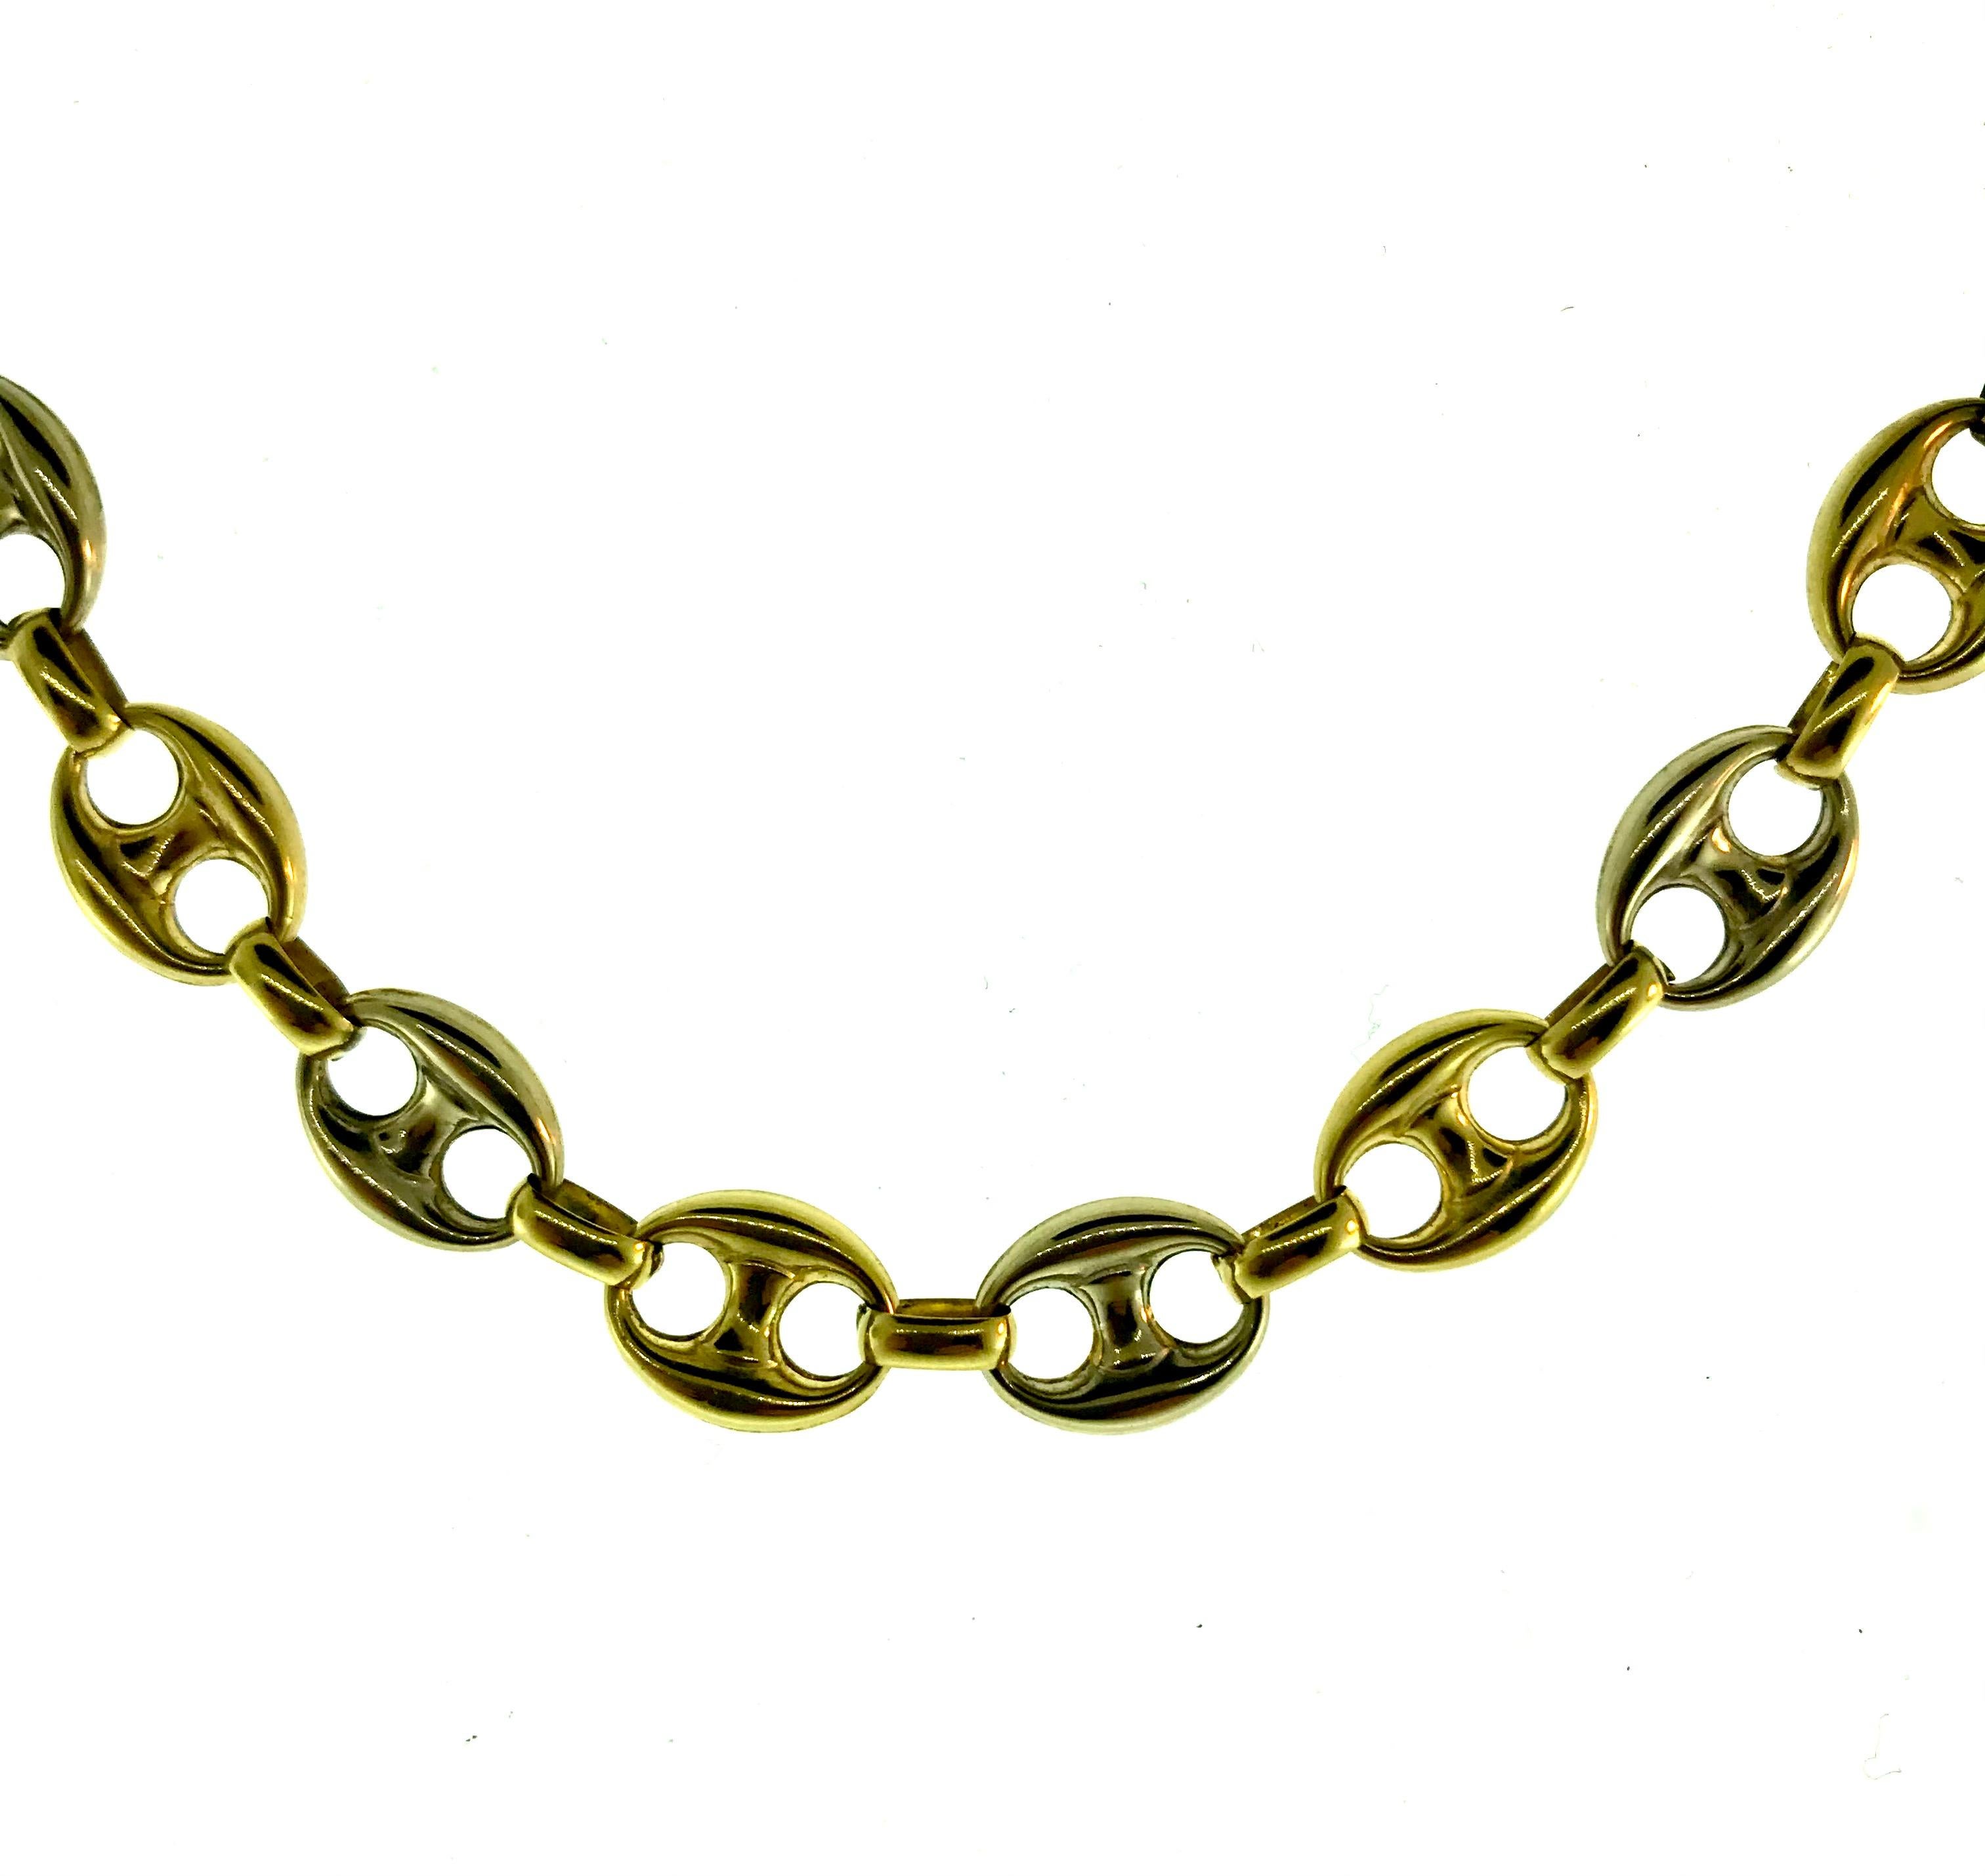 White and yellow 18k mariner puffed link chain necklace by UnoAErre. Excellent for layering or wearing solo. Stamped with the UnoAErre maker's mark and a hallmark for 18k gold.
Measurements: 27